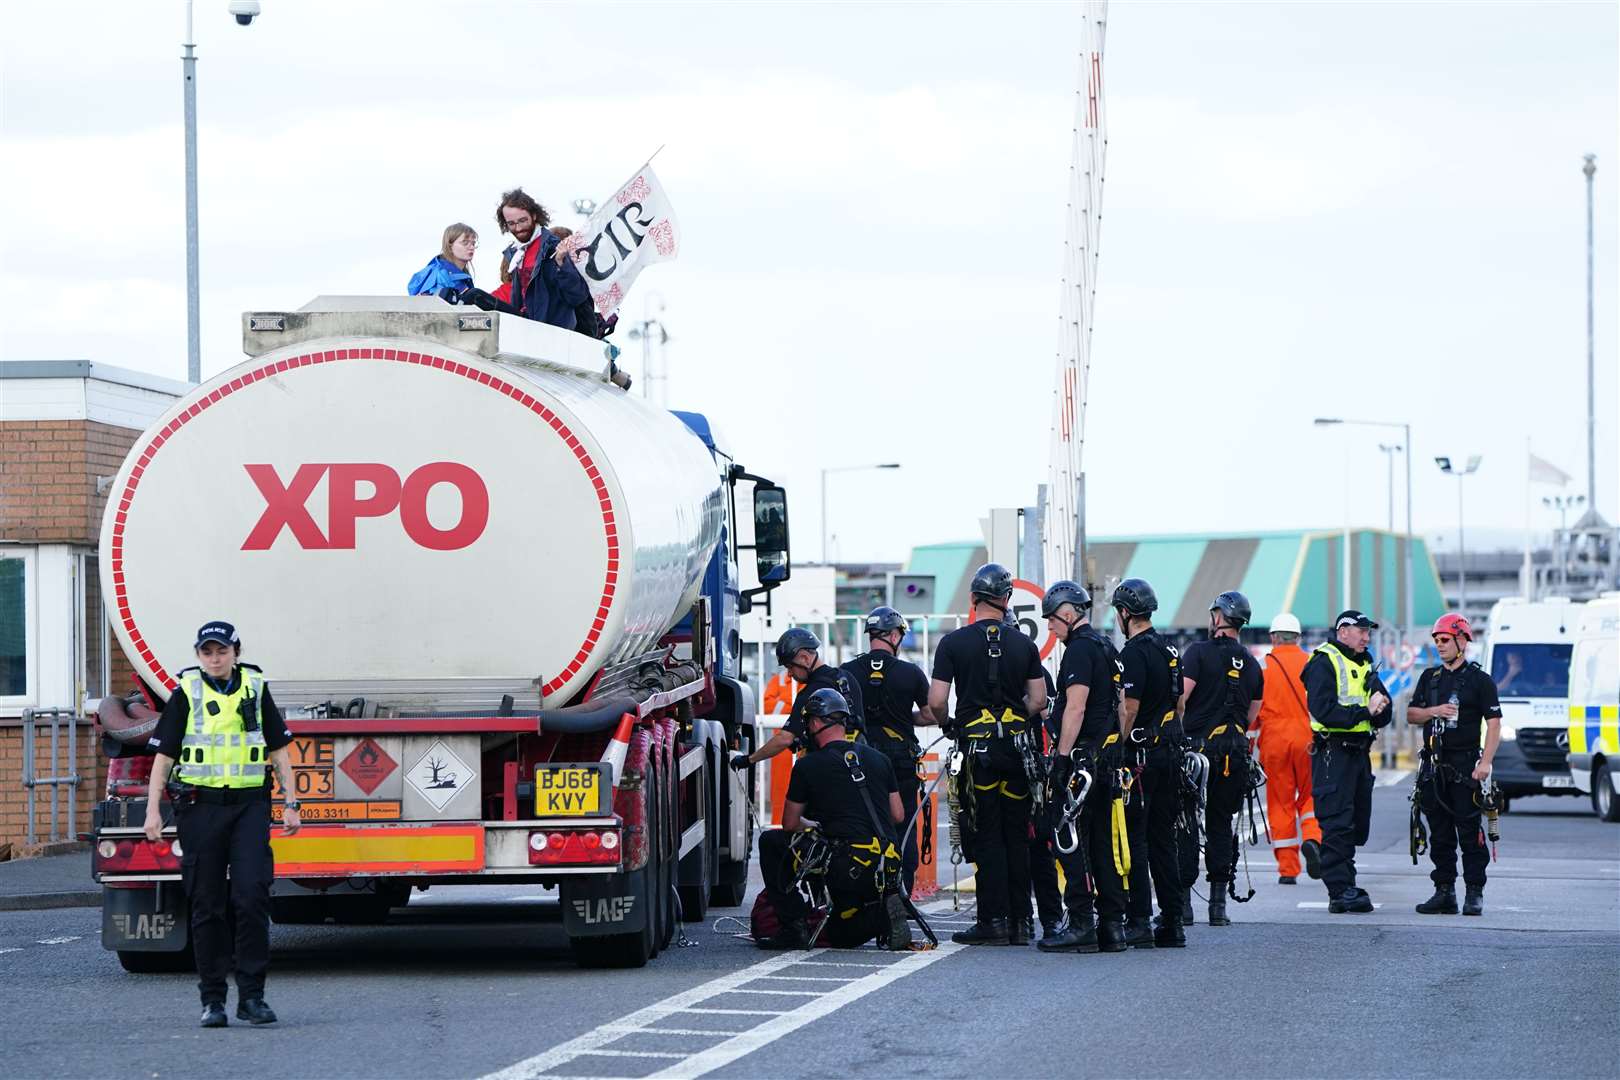 Police prepare to remove protesters from an oil tanker at the Ineos refinery in Grangemouth (Jane Barlow/PA)